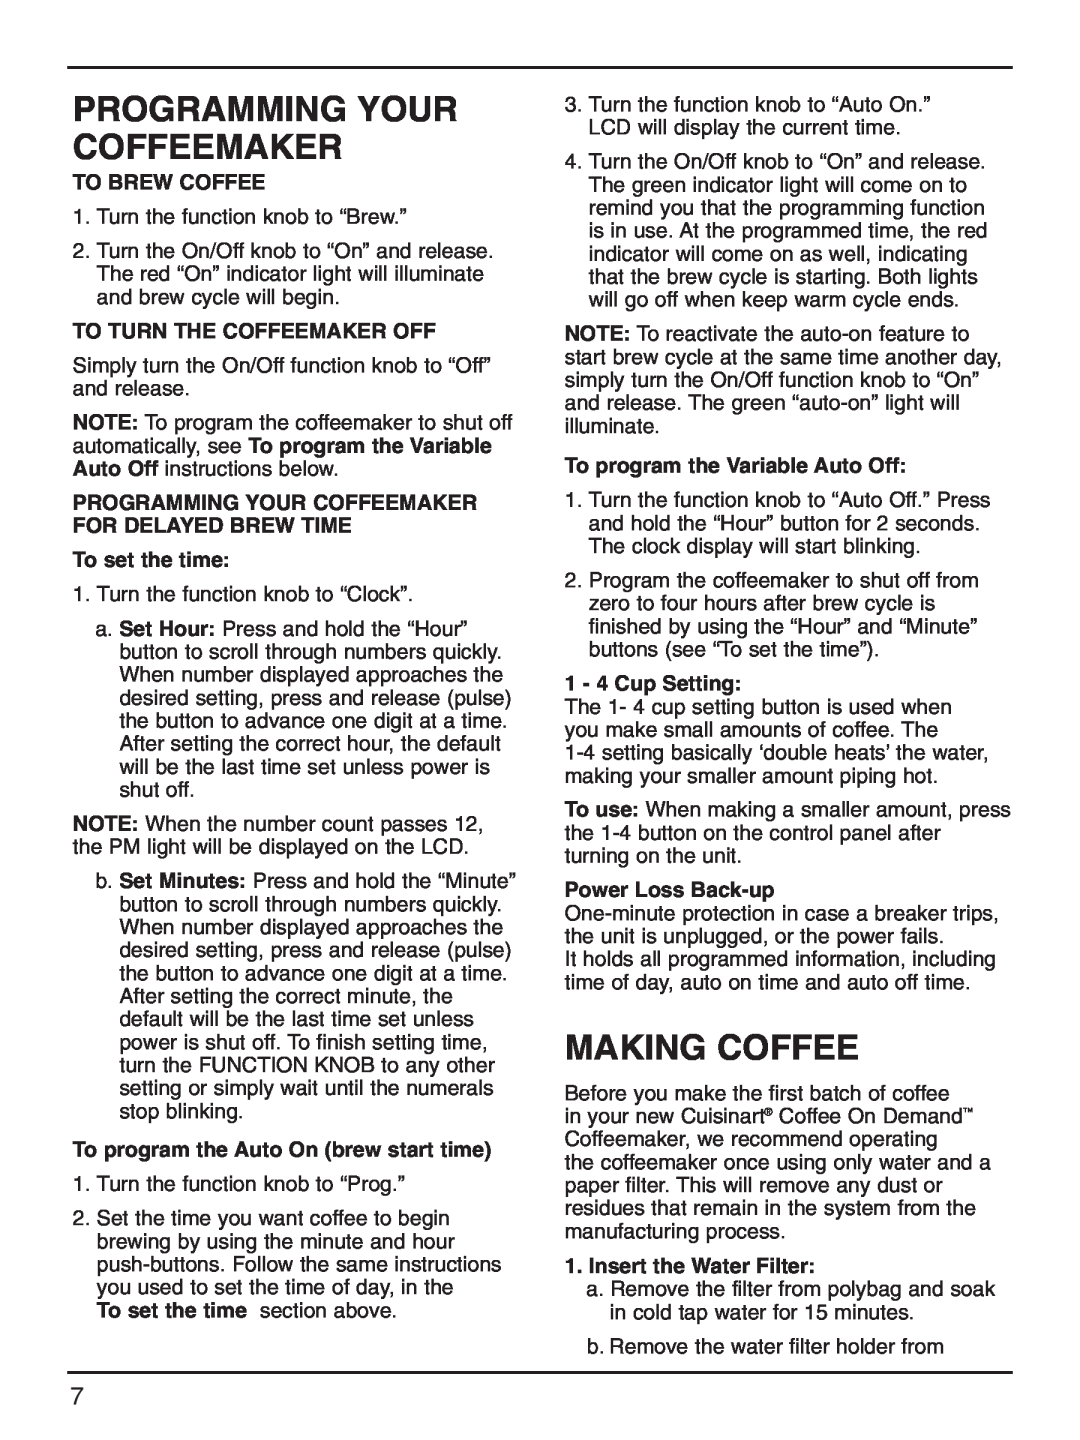 Cuisinart DCC-2000 manual Programming Your Coffeemaker, Making Coffee, To Brew Coffee, To Turn The Coffeemaker Off 